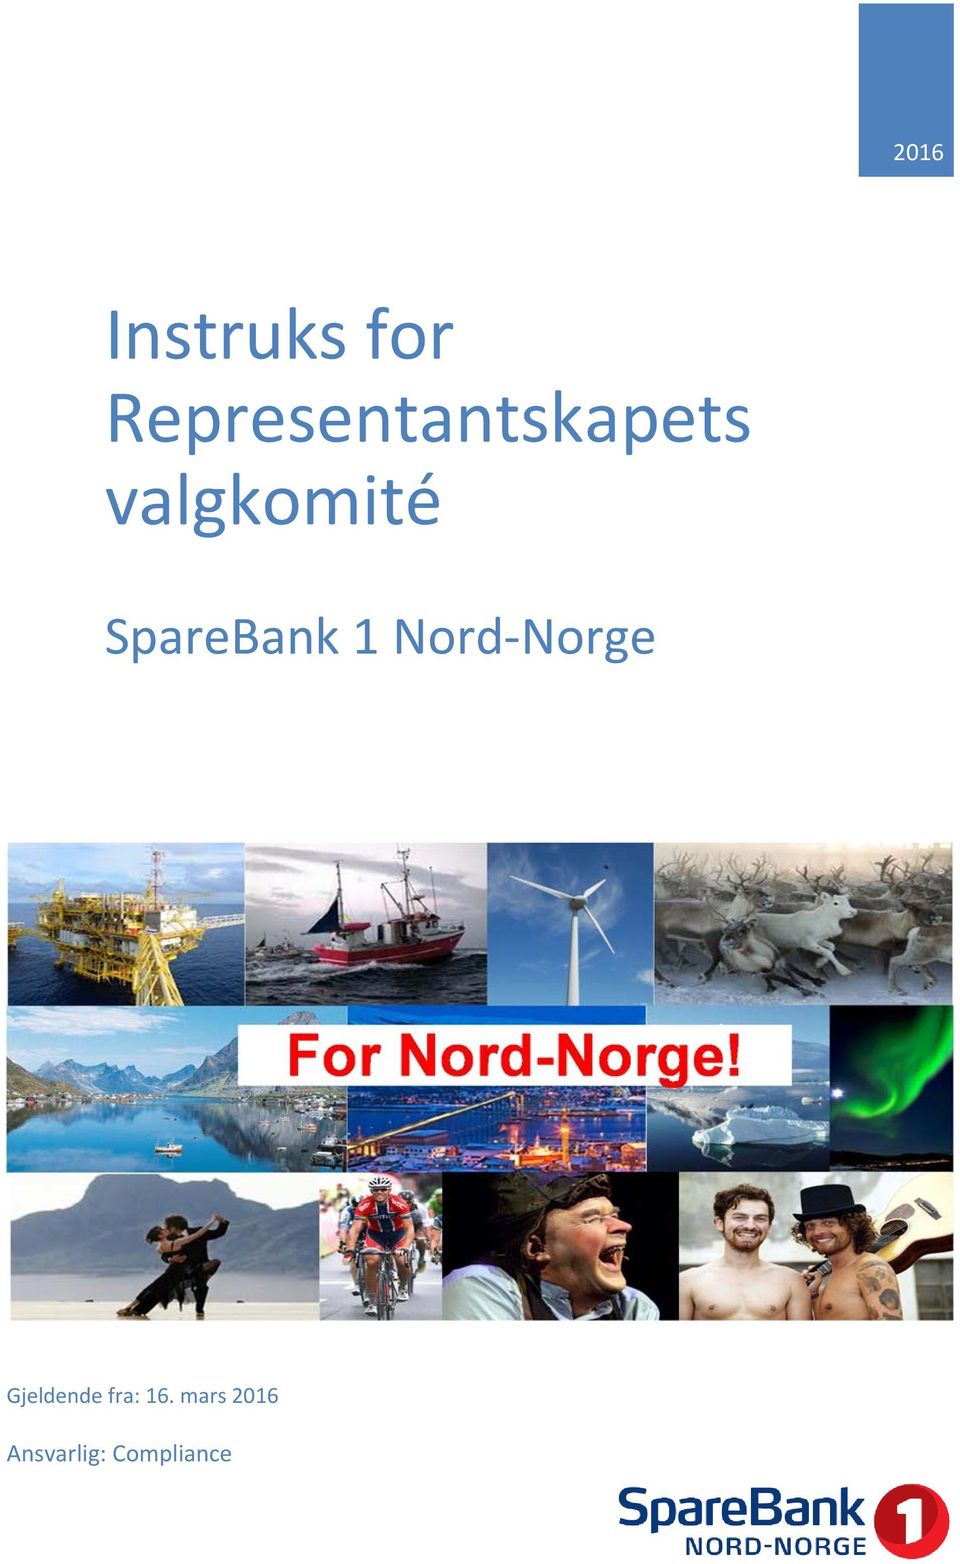 SpareBank 1 Nord Norge